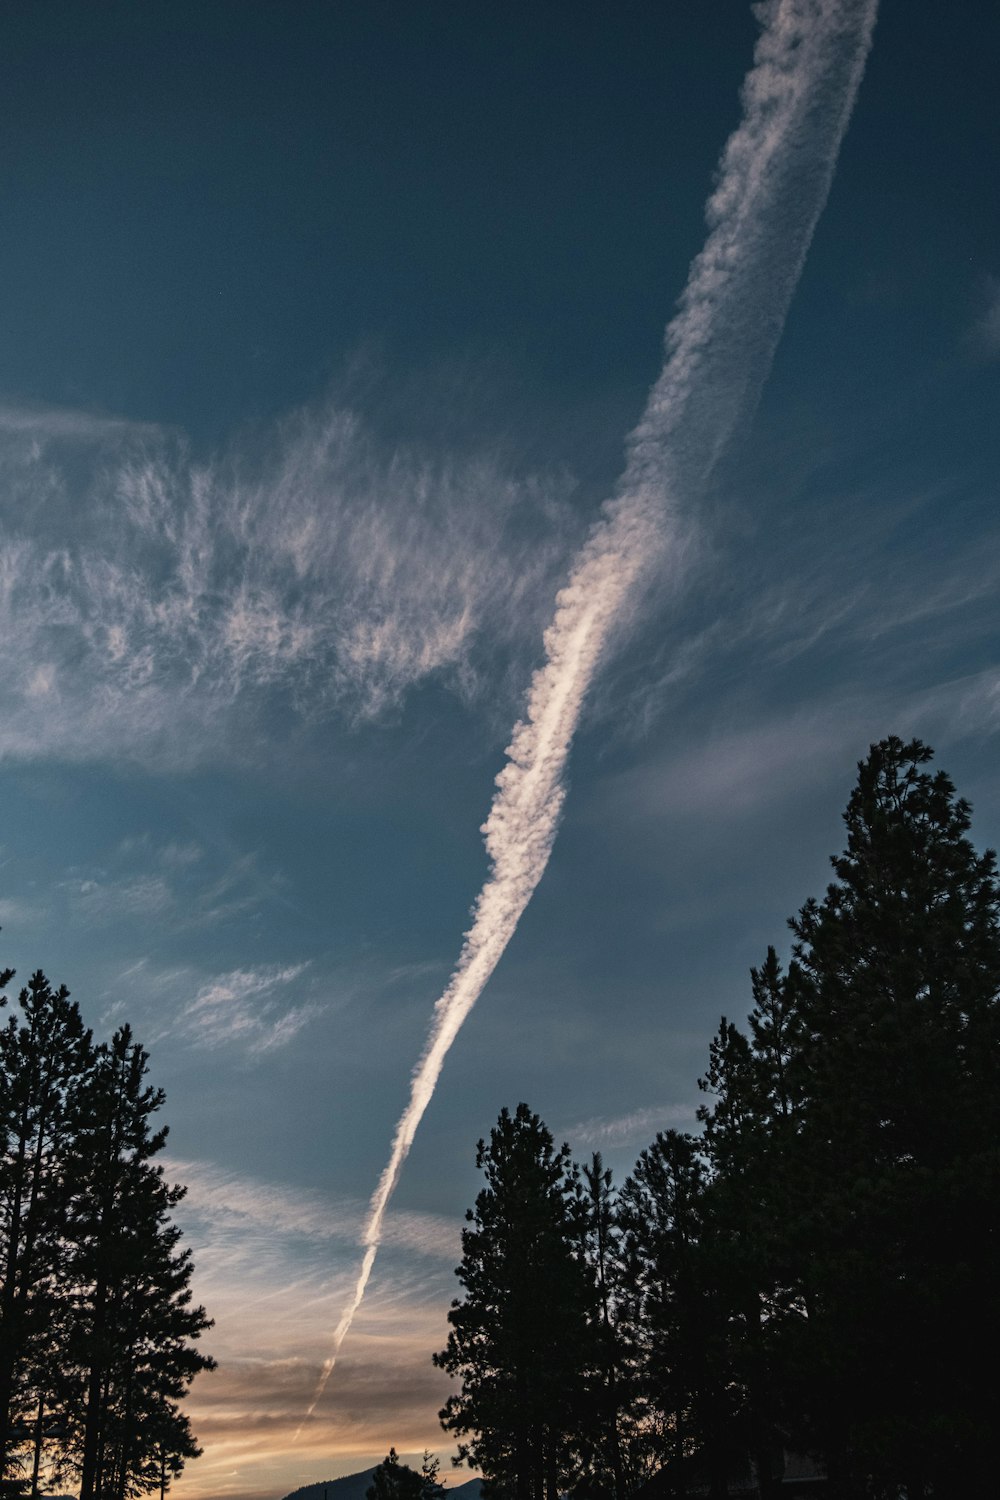 a contrail is seen in the sky above some trees